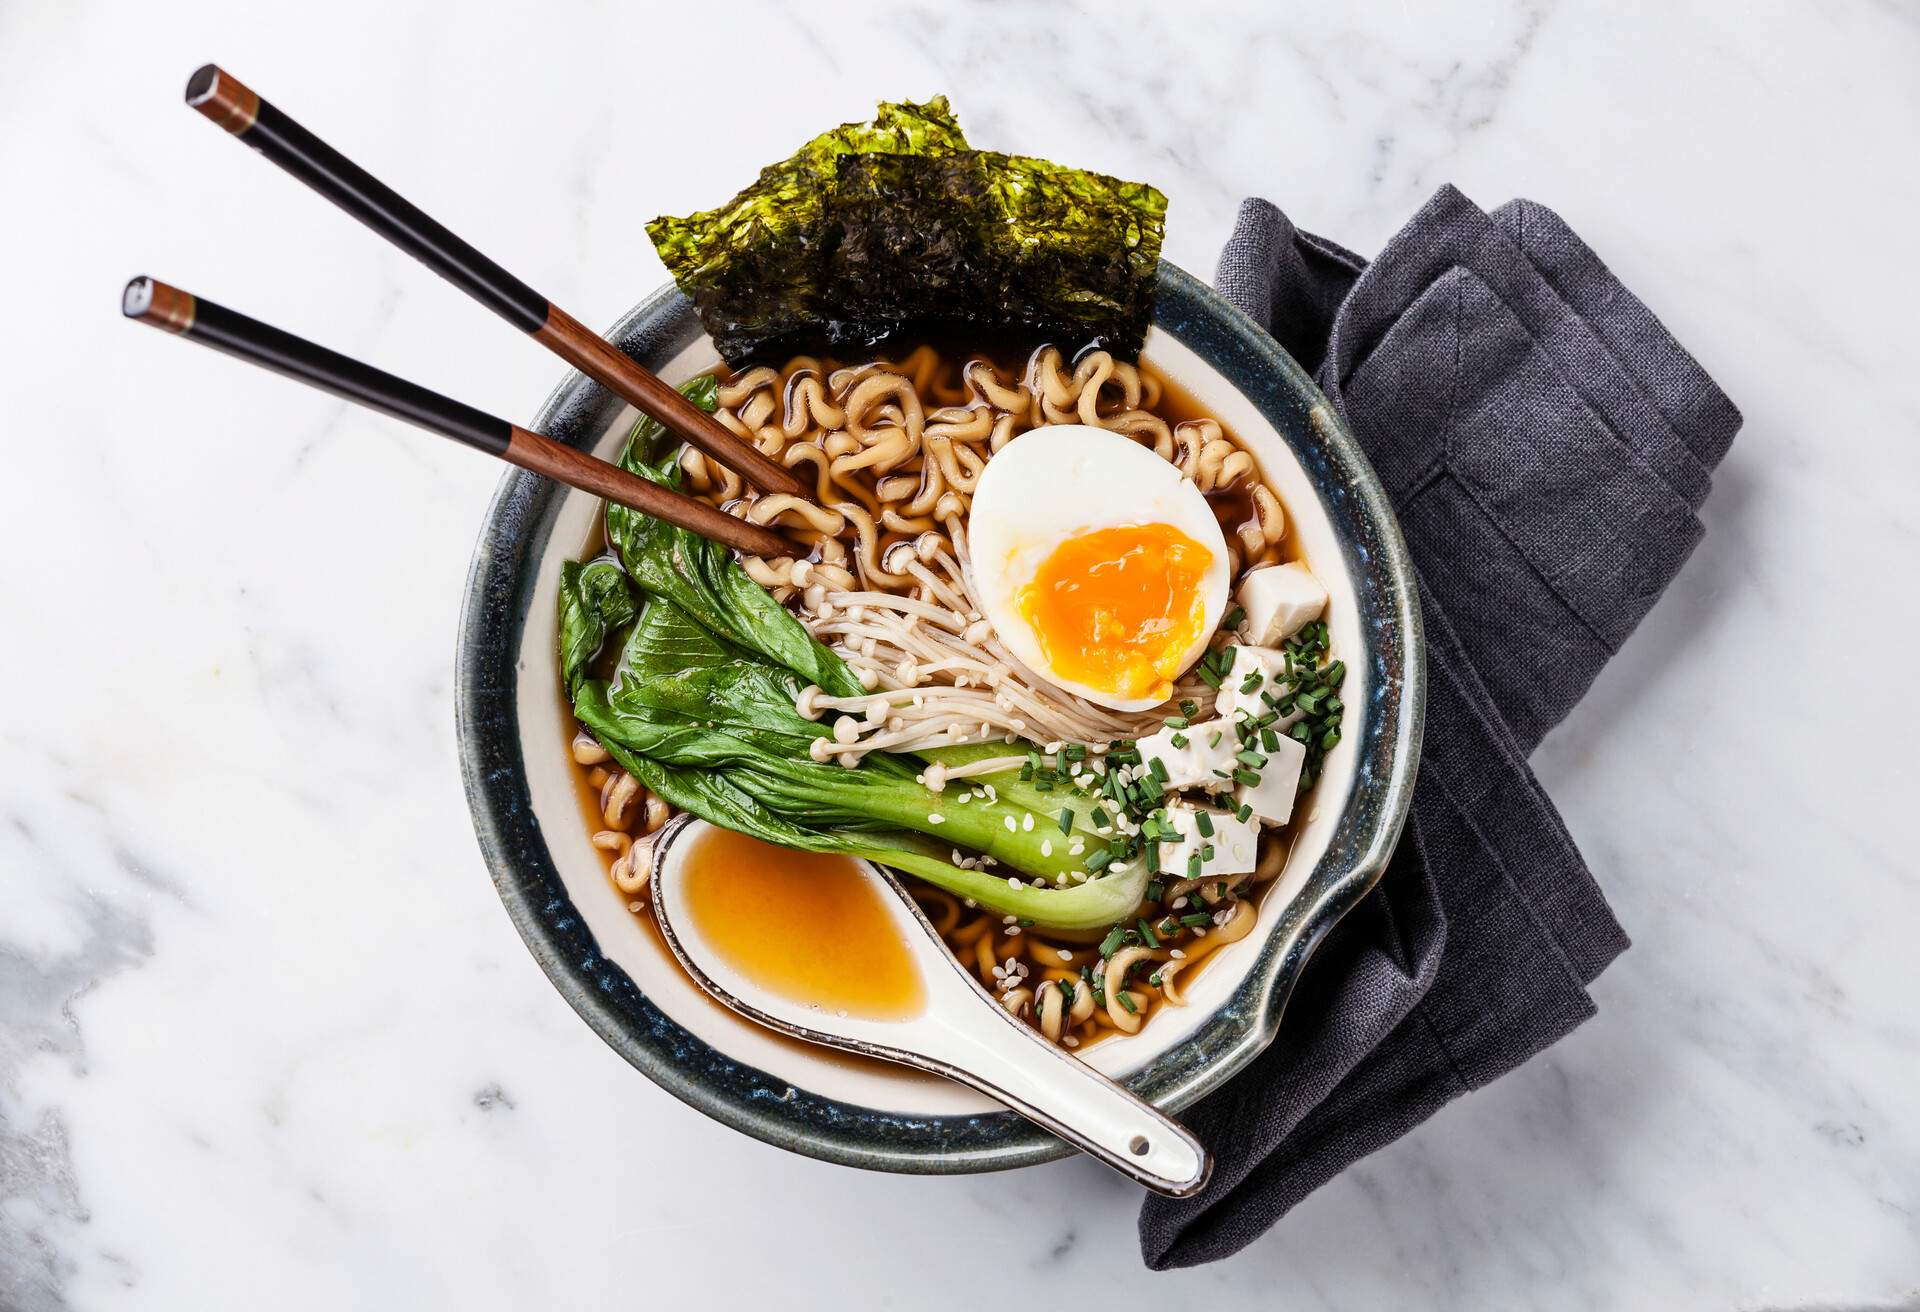 Miso Ramen Asian noodles with egg, enoki and pak choi cabbage in bowl on white marble background